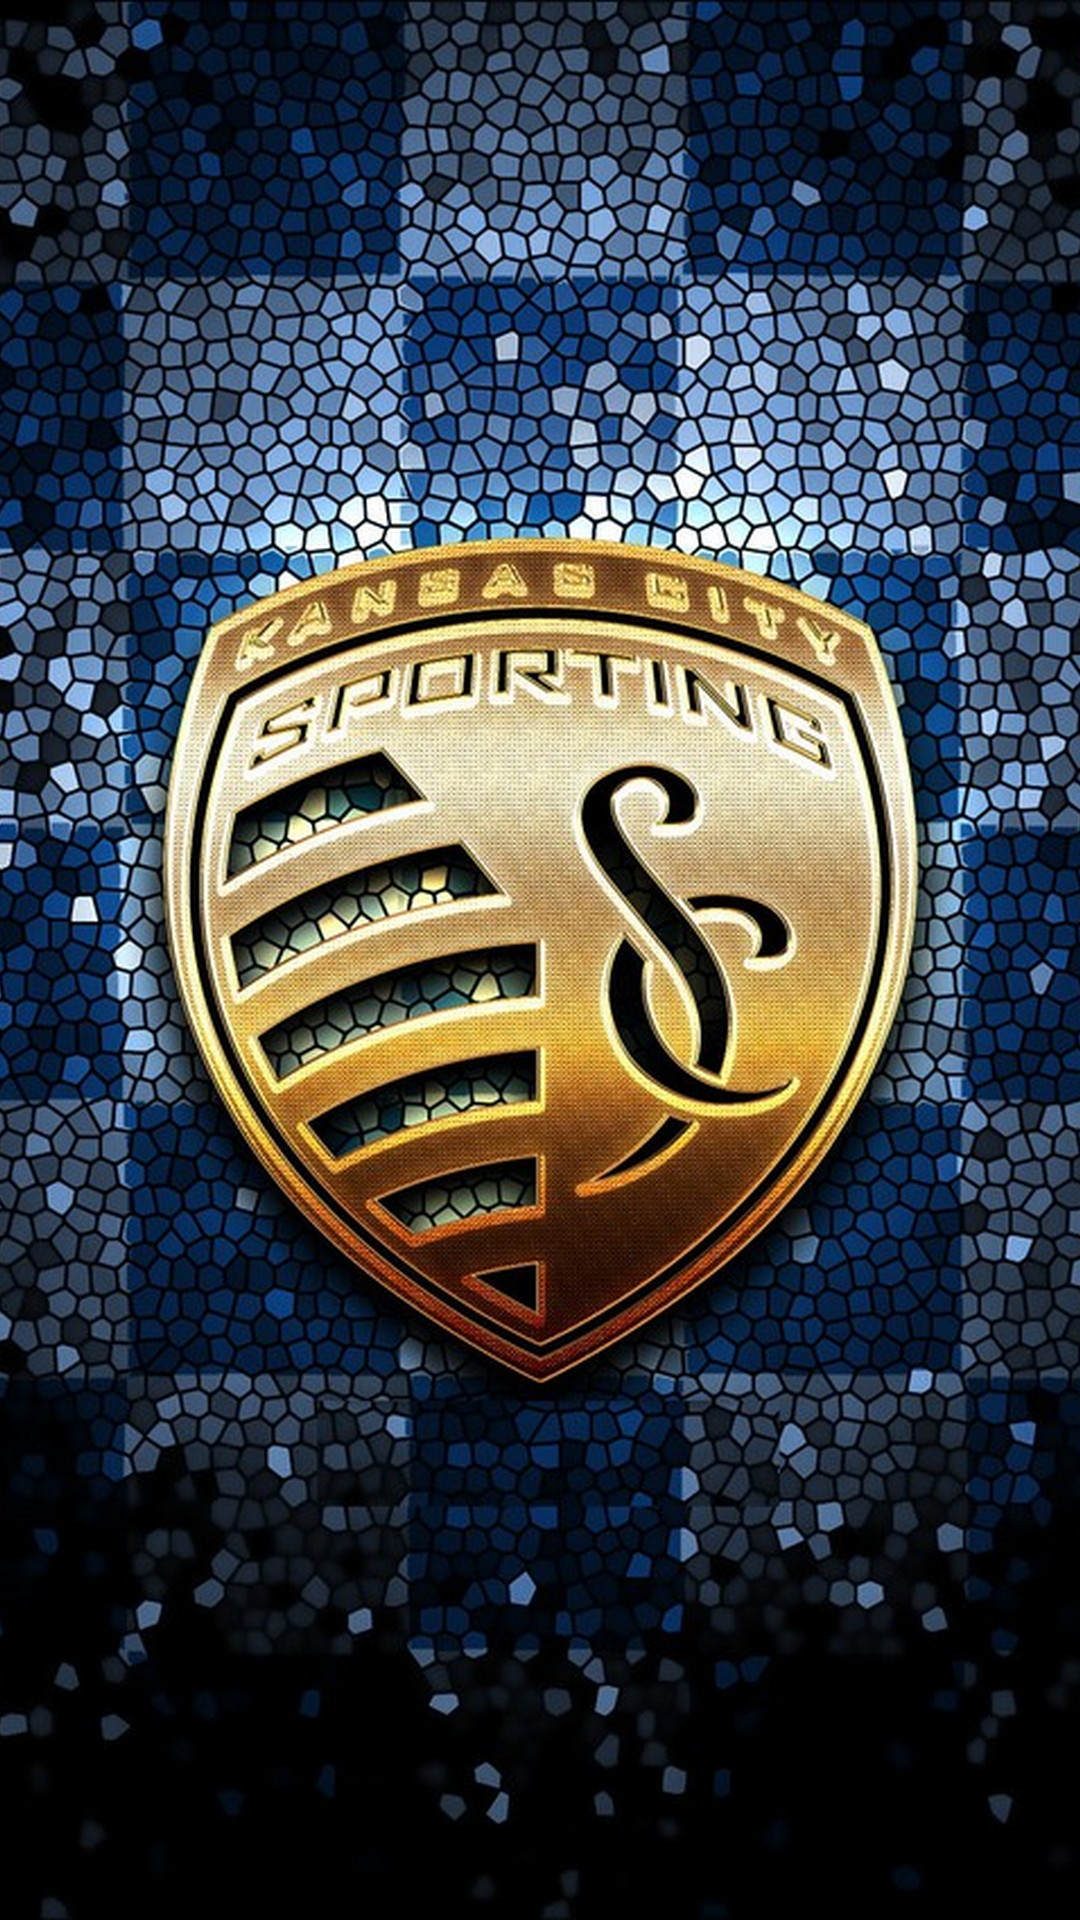 Wallpaper Sporting Kansas City Mobile With high-resolution 1080X1920 pixel. You can use this wallpaper for your Desktop Computers, Mac Screensavers, Windows Backgrounds, iPhone Wallpapers, Tablet or Android Lock screen and another Mobile device